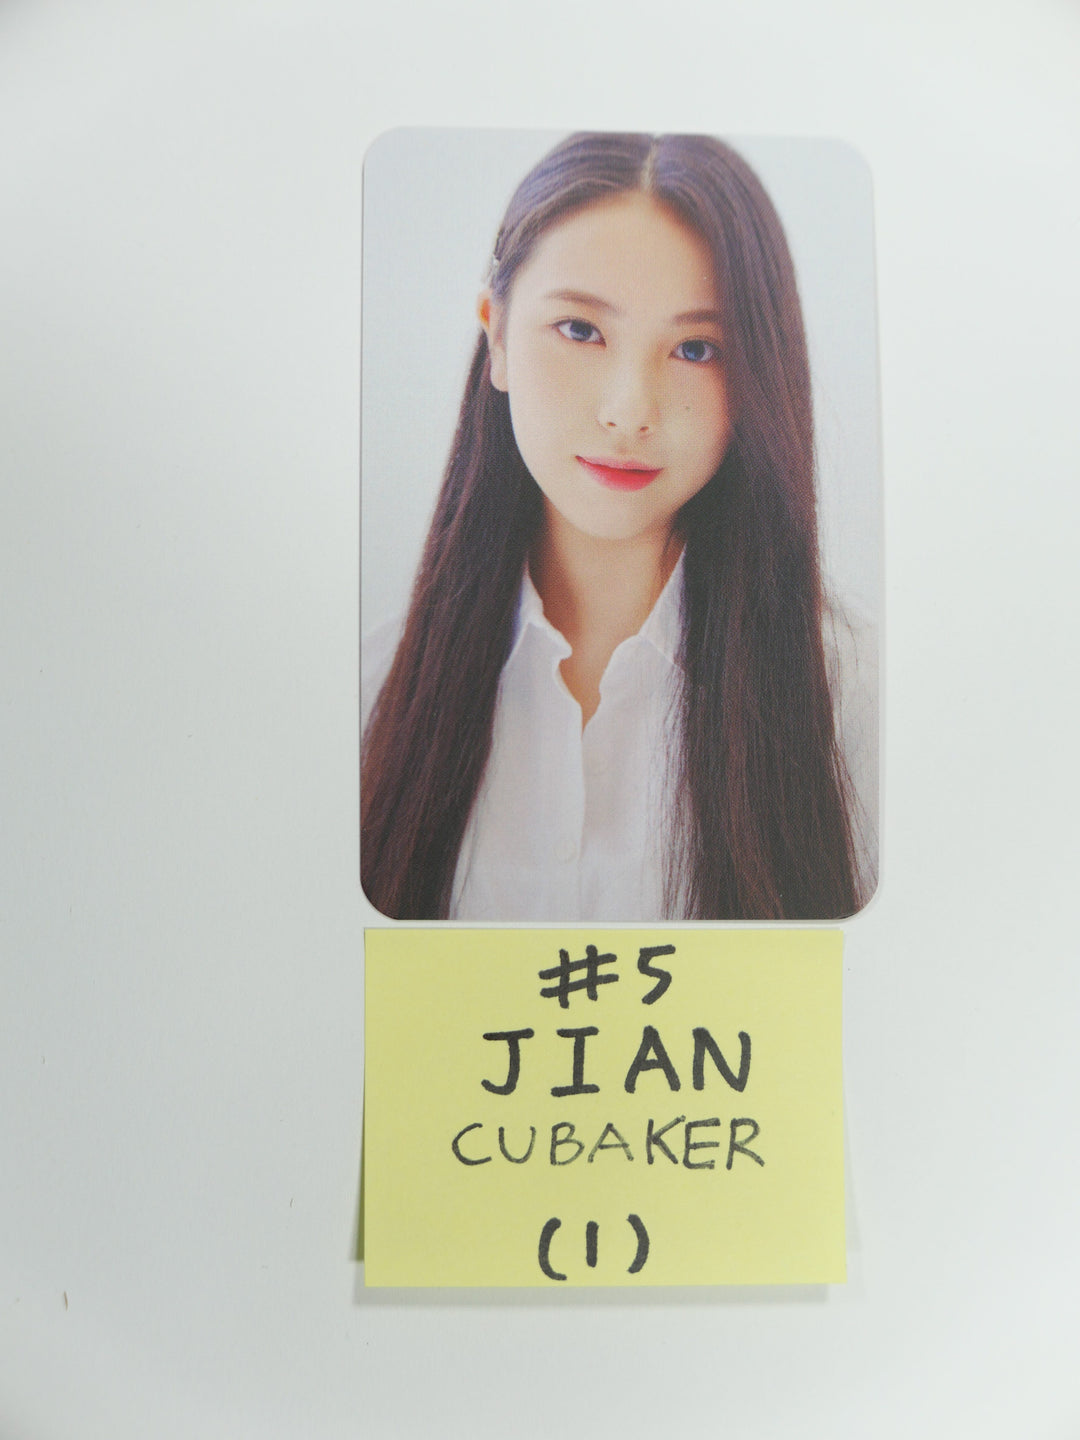 Lightsum - CUBAKER Event Hand Autograpted Cup Holder & Photocard